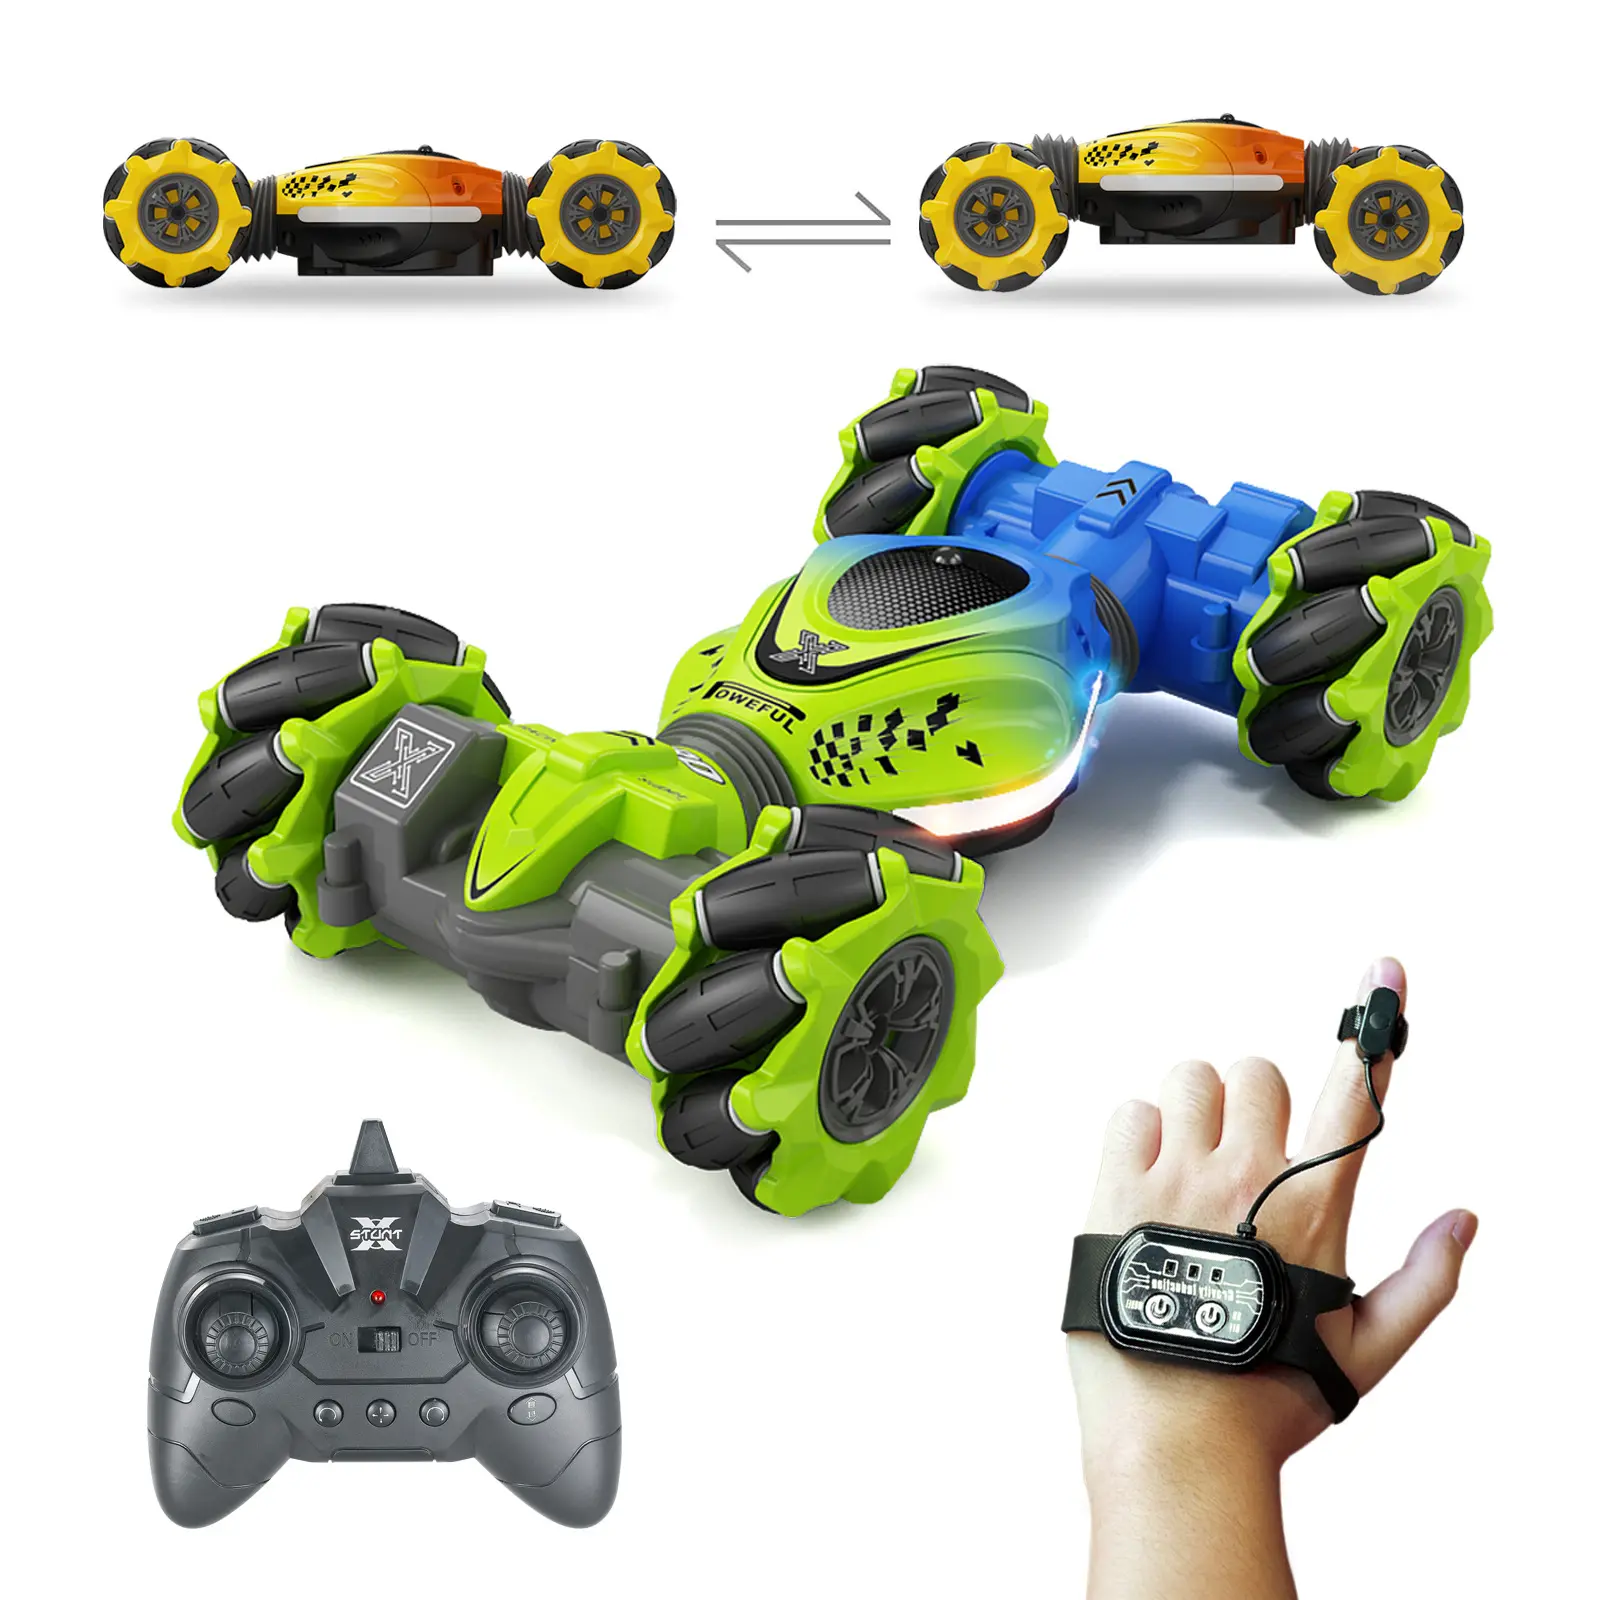 Quality Gift stunt gesture Watch Control Vehicle fast rc car for adults with high speed radio control Toy Car Remote Control